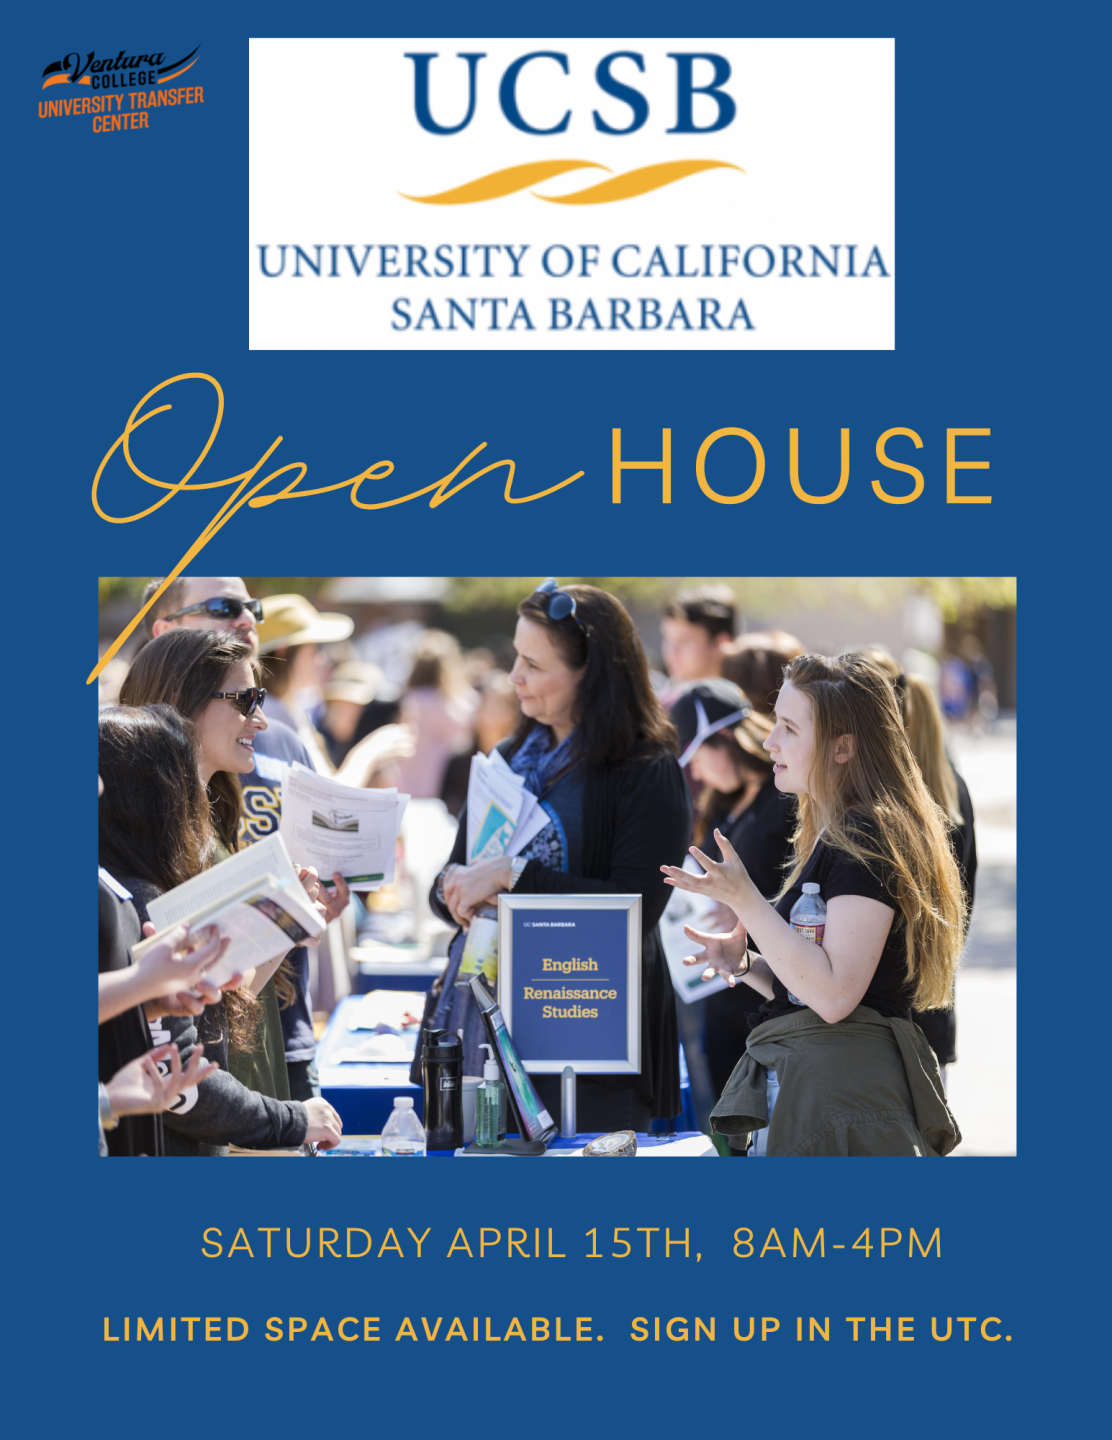 UCSB open house